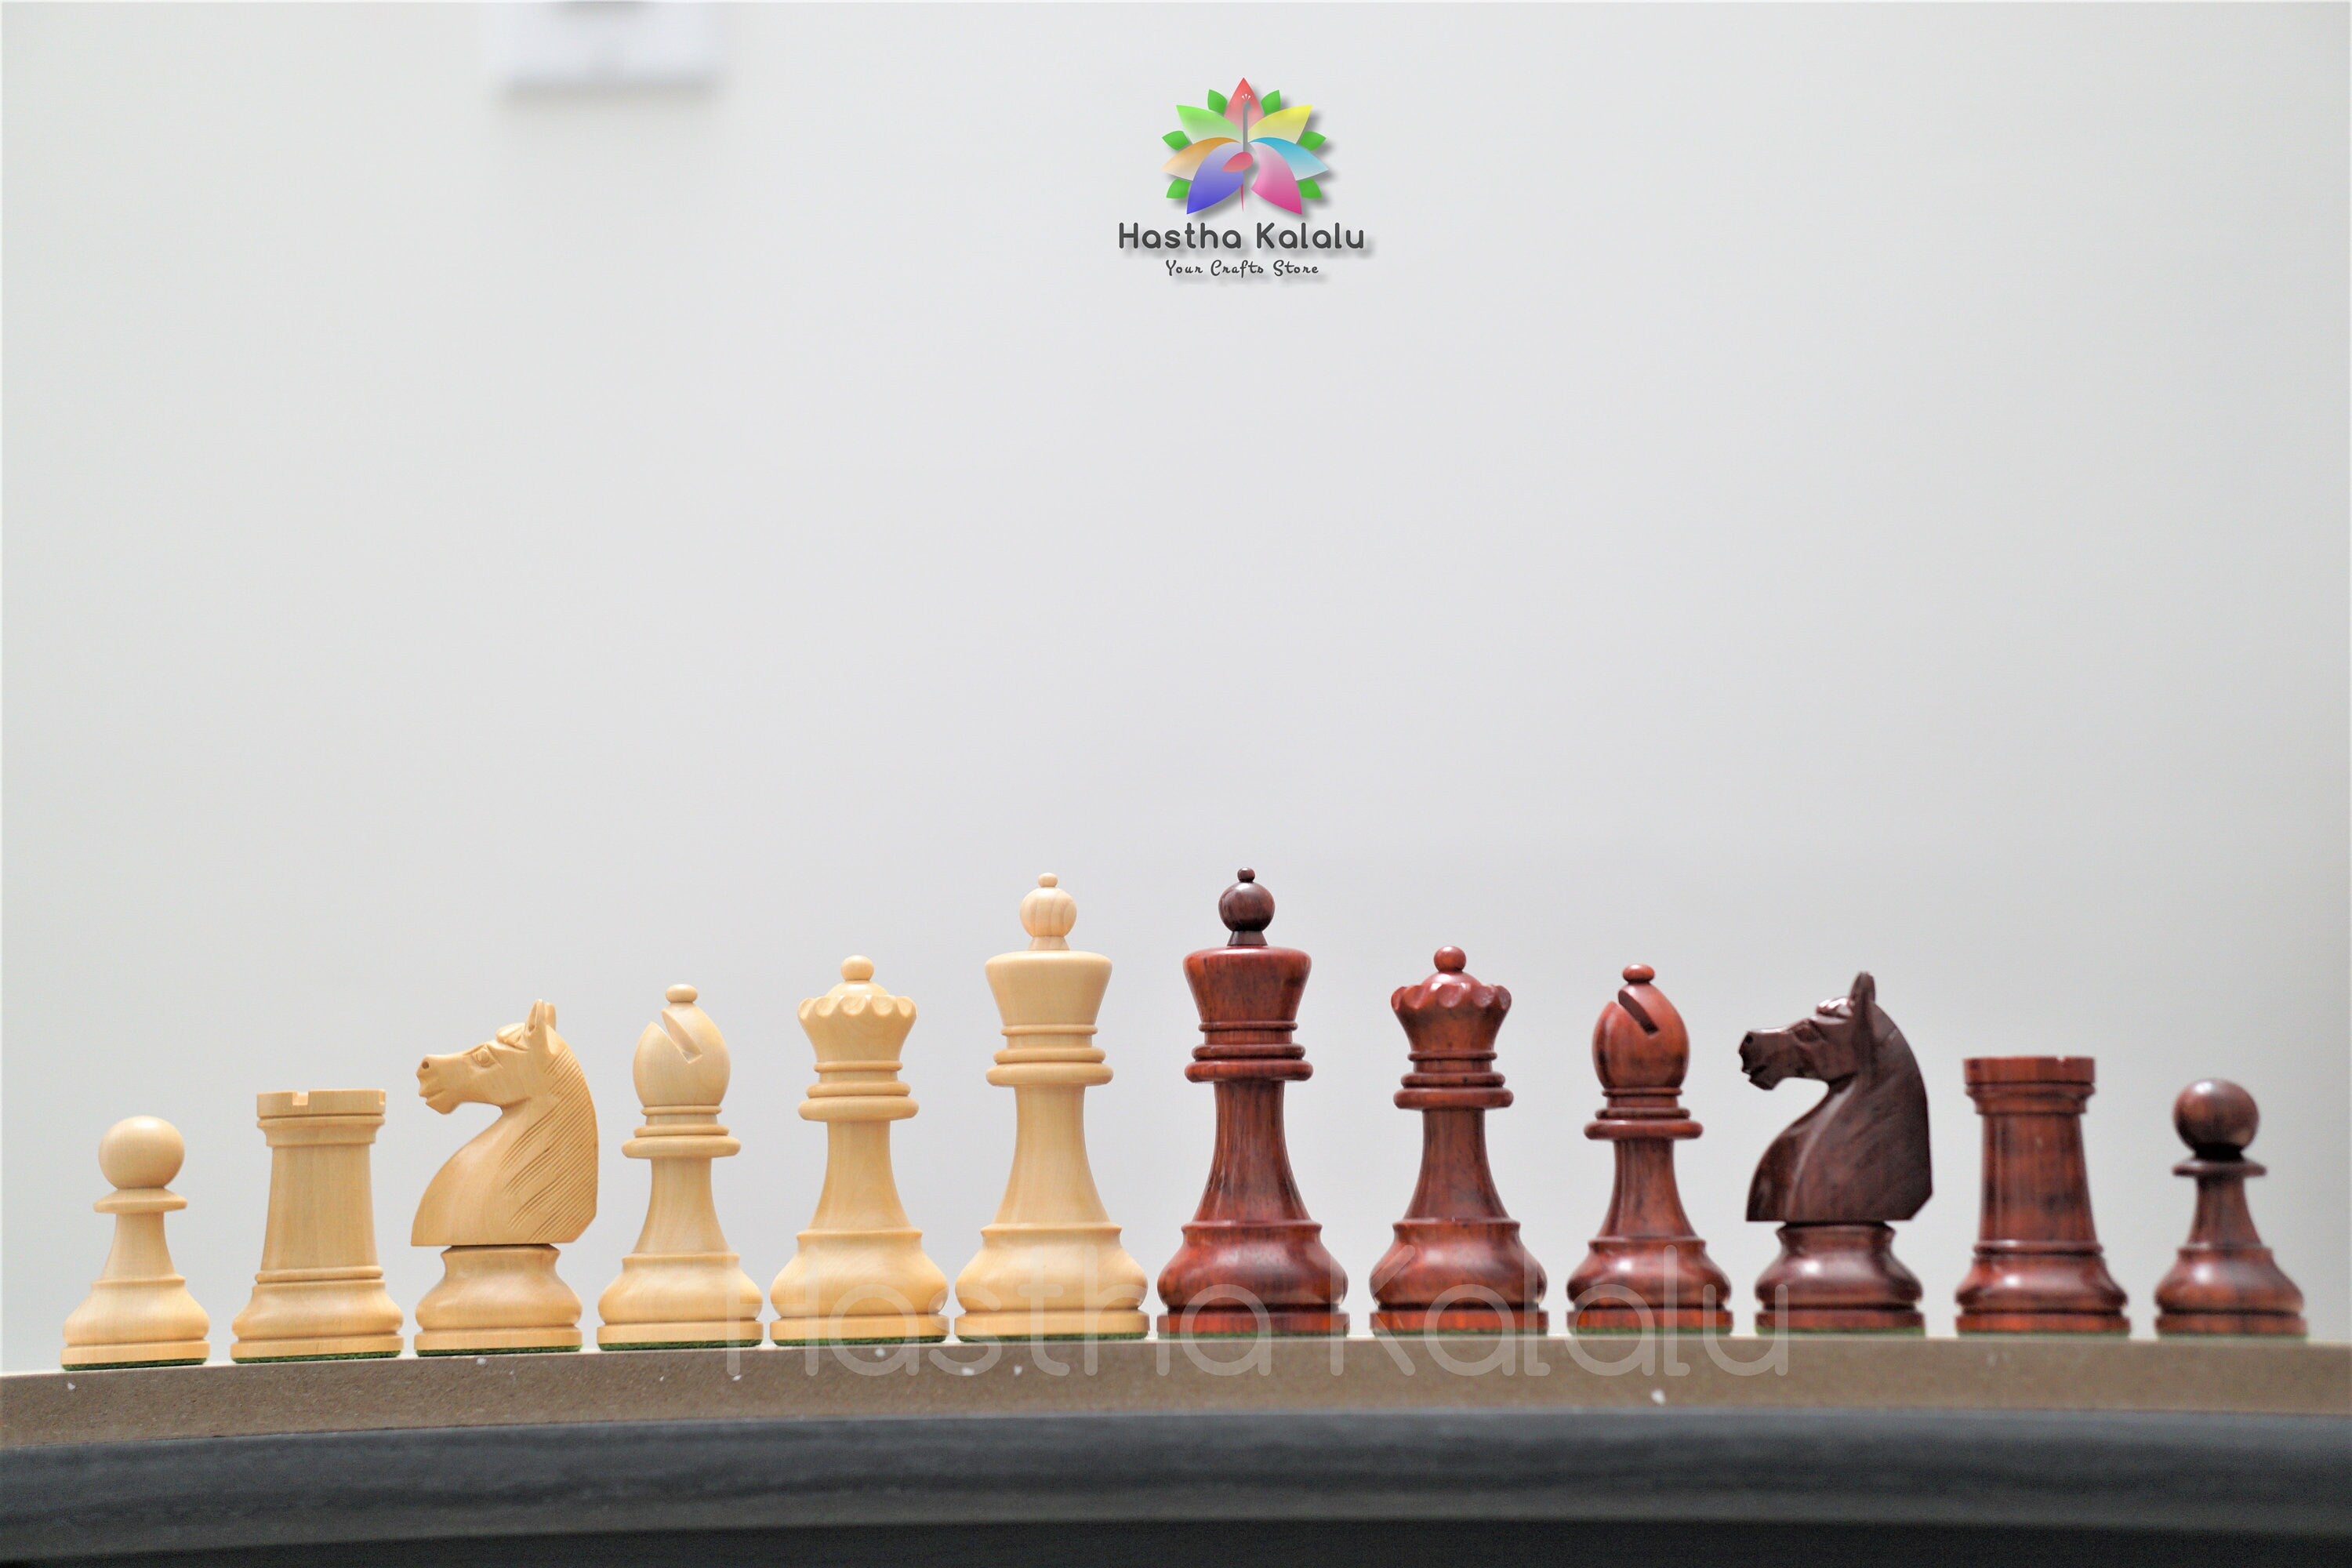 1920's German Collectors' Chess Pieces Only Staunton Set- Budrosewood/ Boxwood - 3.75" King, Weighted 2 Extra queens